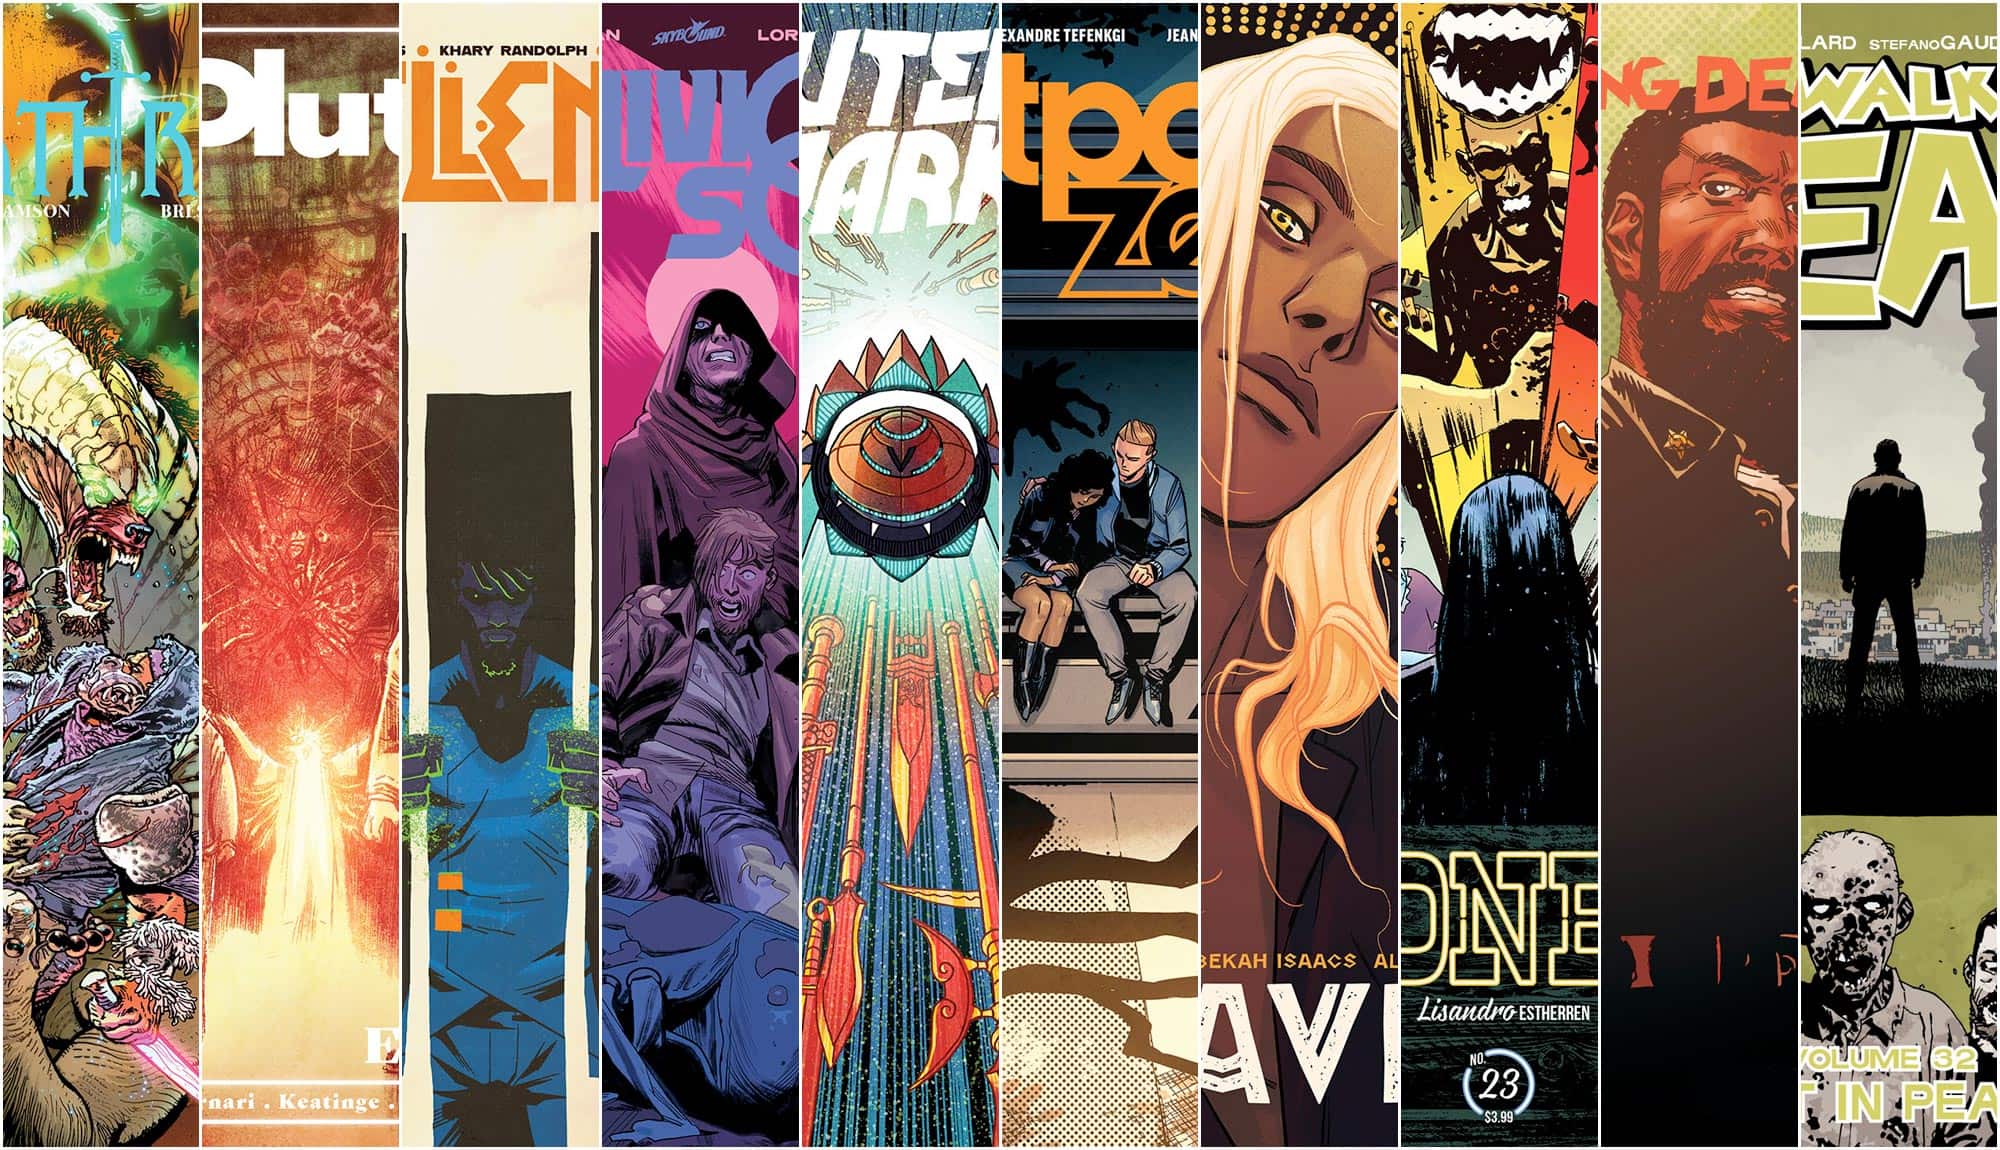 August 2019 Skybound Solicits! Books Announced!